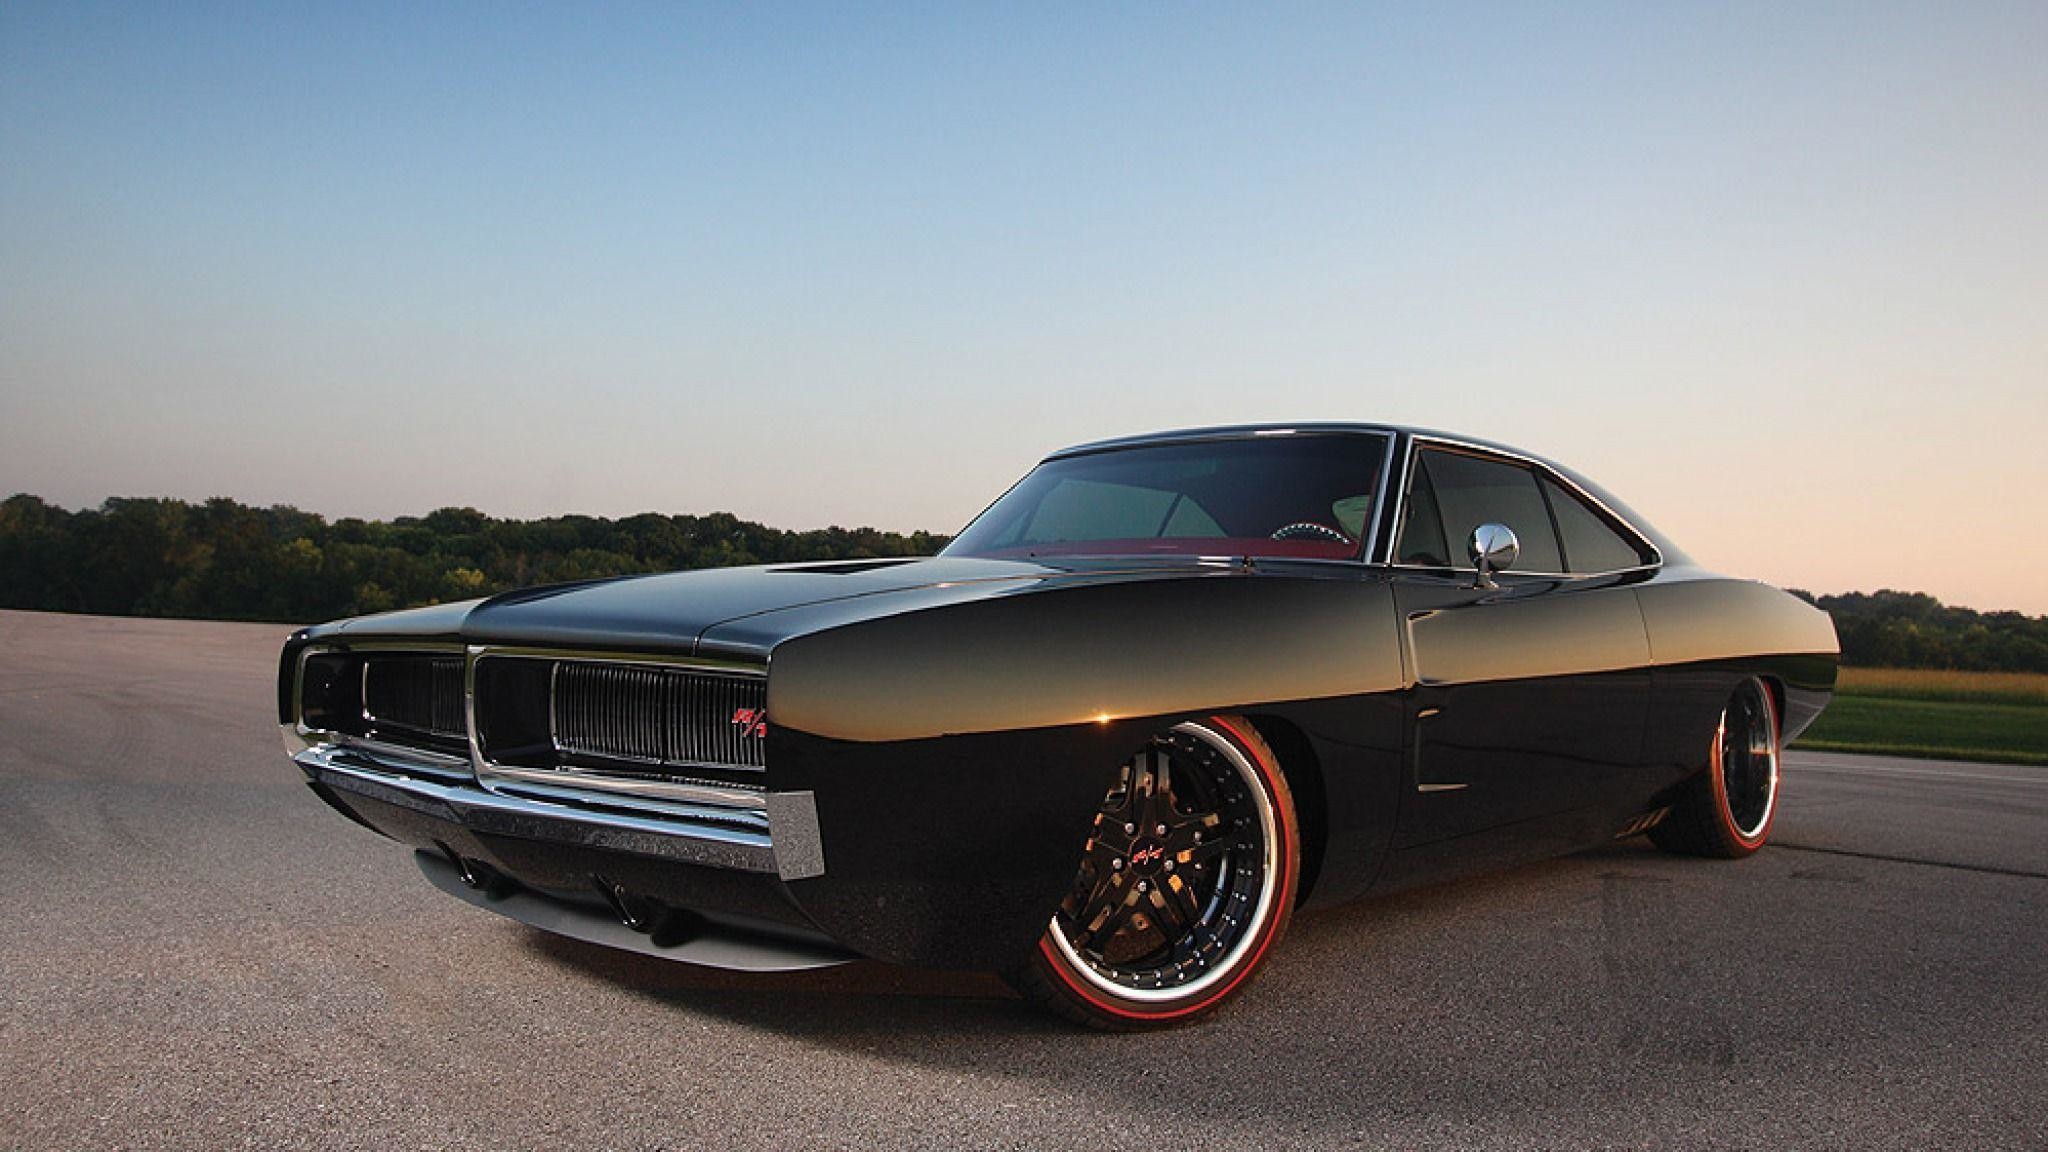 2048x1152 Dodge Charger Wallpaper Dodge Charger R T Hd Widescreen Wallpapers .